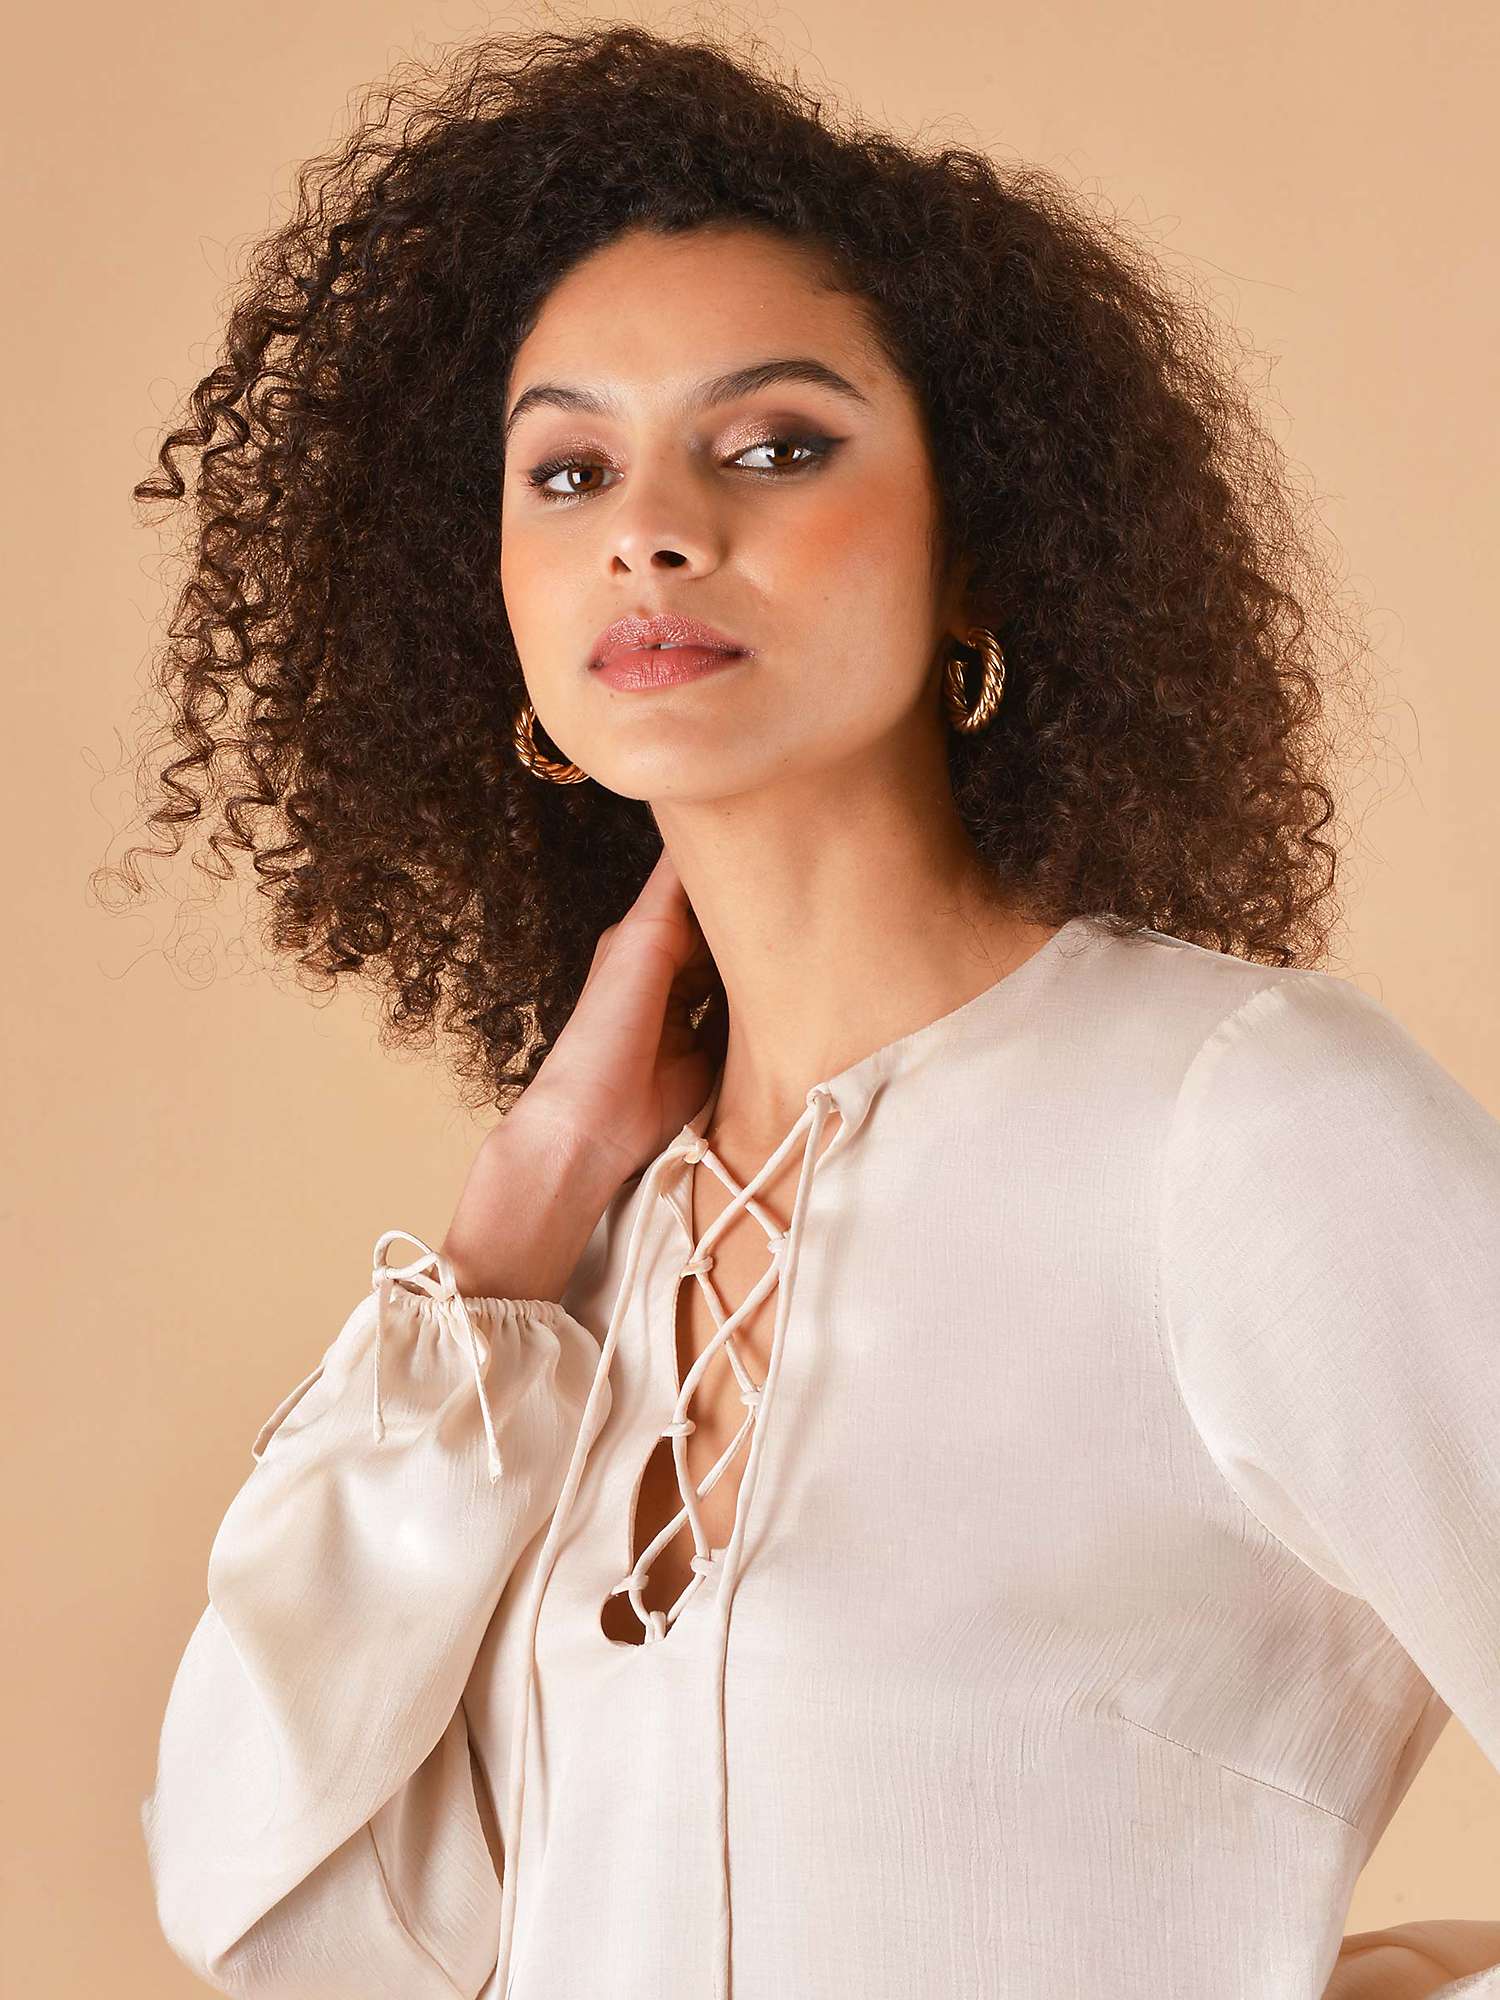 Buy Ro&Zo Lace Up Detail Blouse Online at johnlewis.com